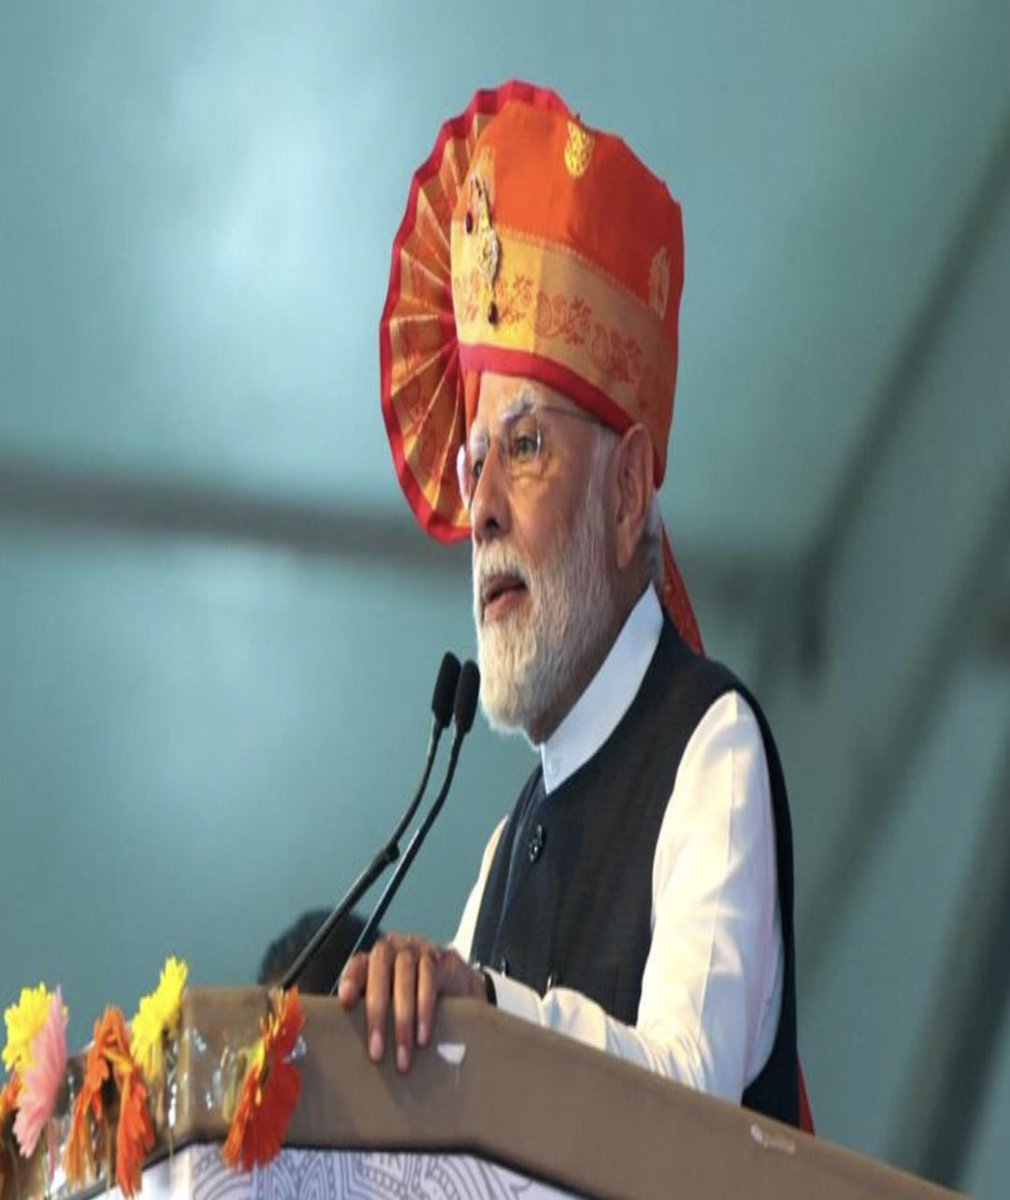 Prime Minister Narendra Modi inaugurated the 27th National Youth Festival in Nashik, Maharashtra, coinciding with Swami Vivekananda's birth anniversary. The festival, dedicated to showcasing youthful talent and skills nationwide. 

#NationalYouthFestival #NashikEvent